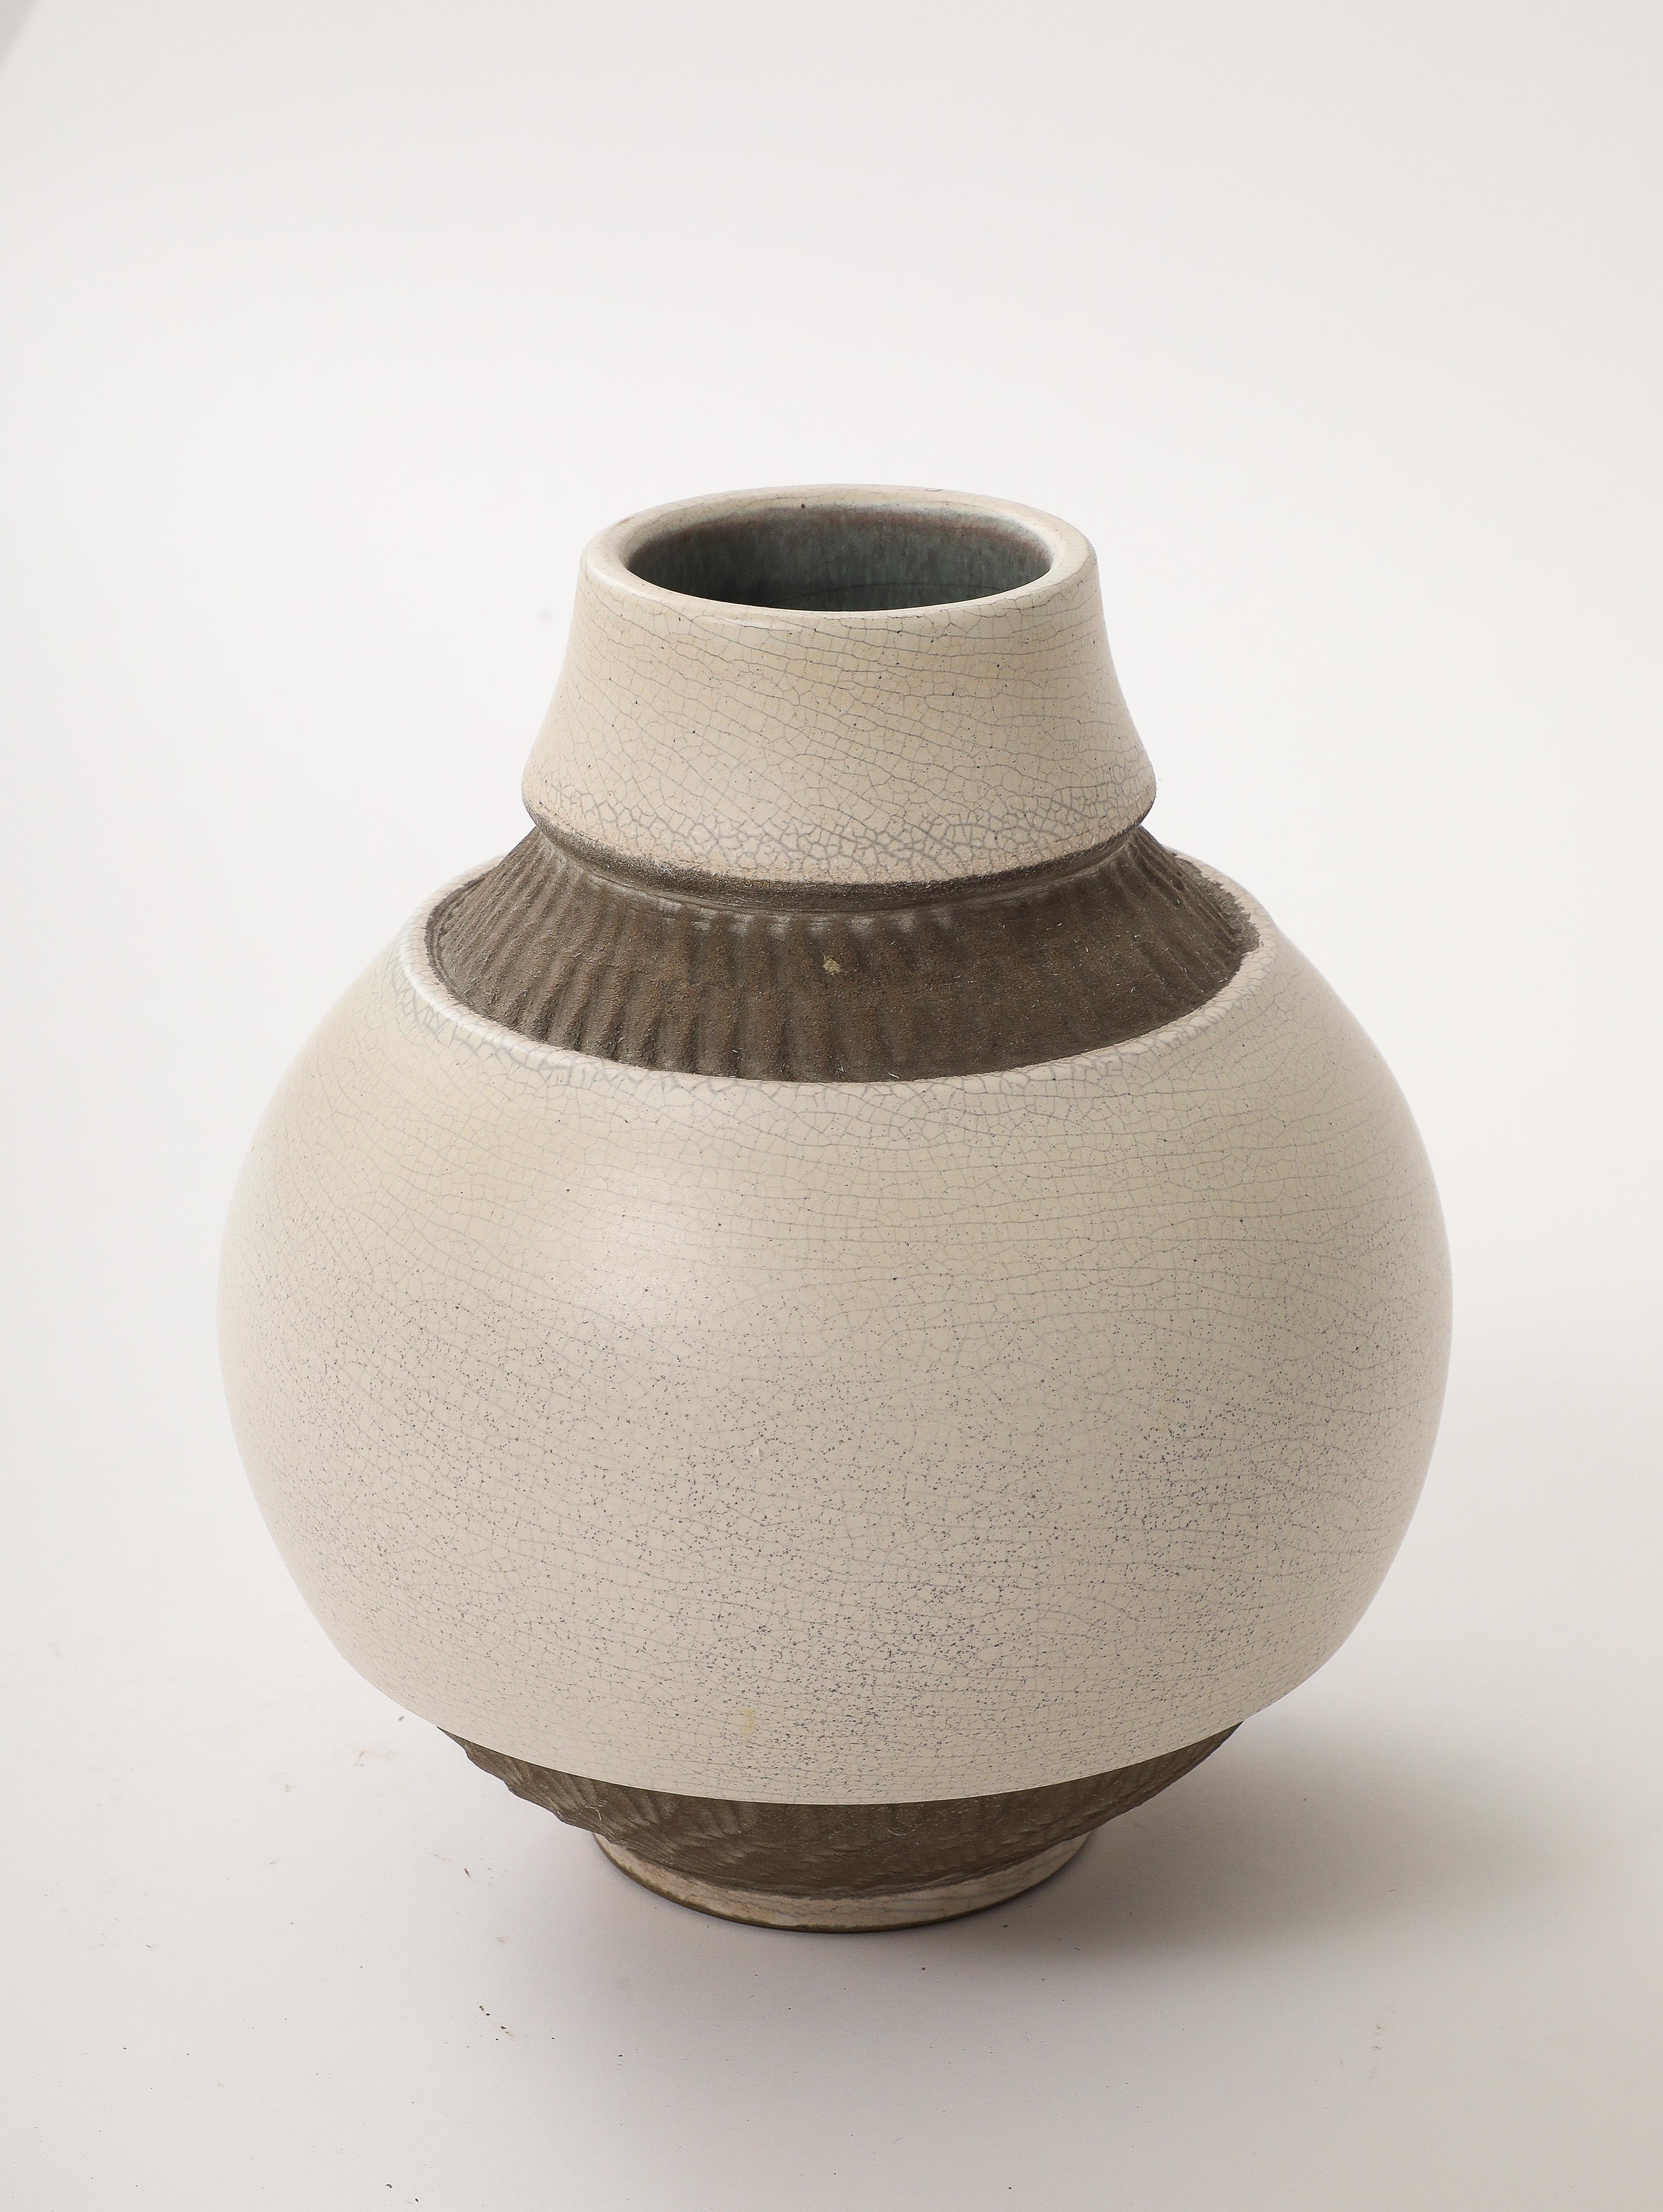 Pol Chambost Off-White Crackle Vase, Brown Incised Bands, Frankreich, 1940, signiert im Angebot 2